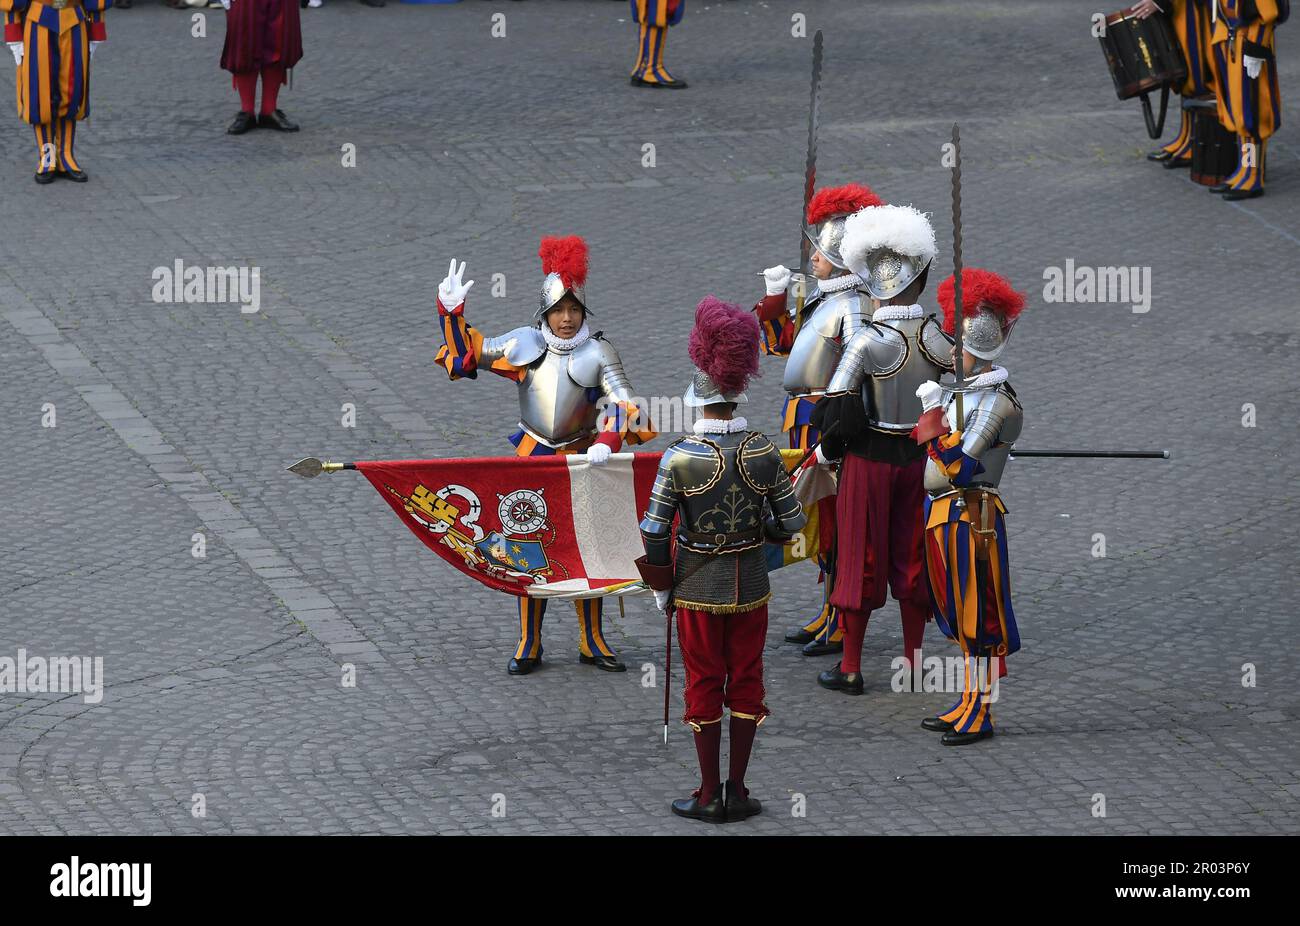 Swearing-in ceremony of the 23 new recruits of the Swiss Guard at the Vatican on May 6, 2023. This traditional ceremony takes place every year on May 6. The day marks the anniversary of the heroic sacrifice of 147 Swiss guards who died during the Sack of Rome in 1527 as they protected Pope Clement VII. Photo: Vatican Media (EV) /ABACAPRESS.COM Credit: Abaca Press/Alamy Live News Stock Photo